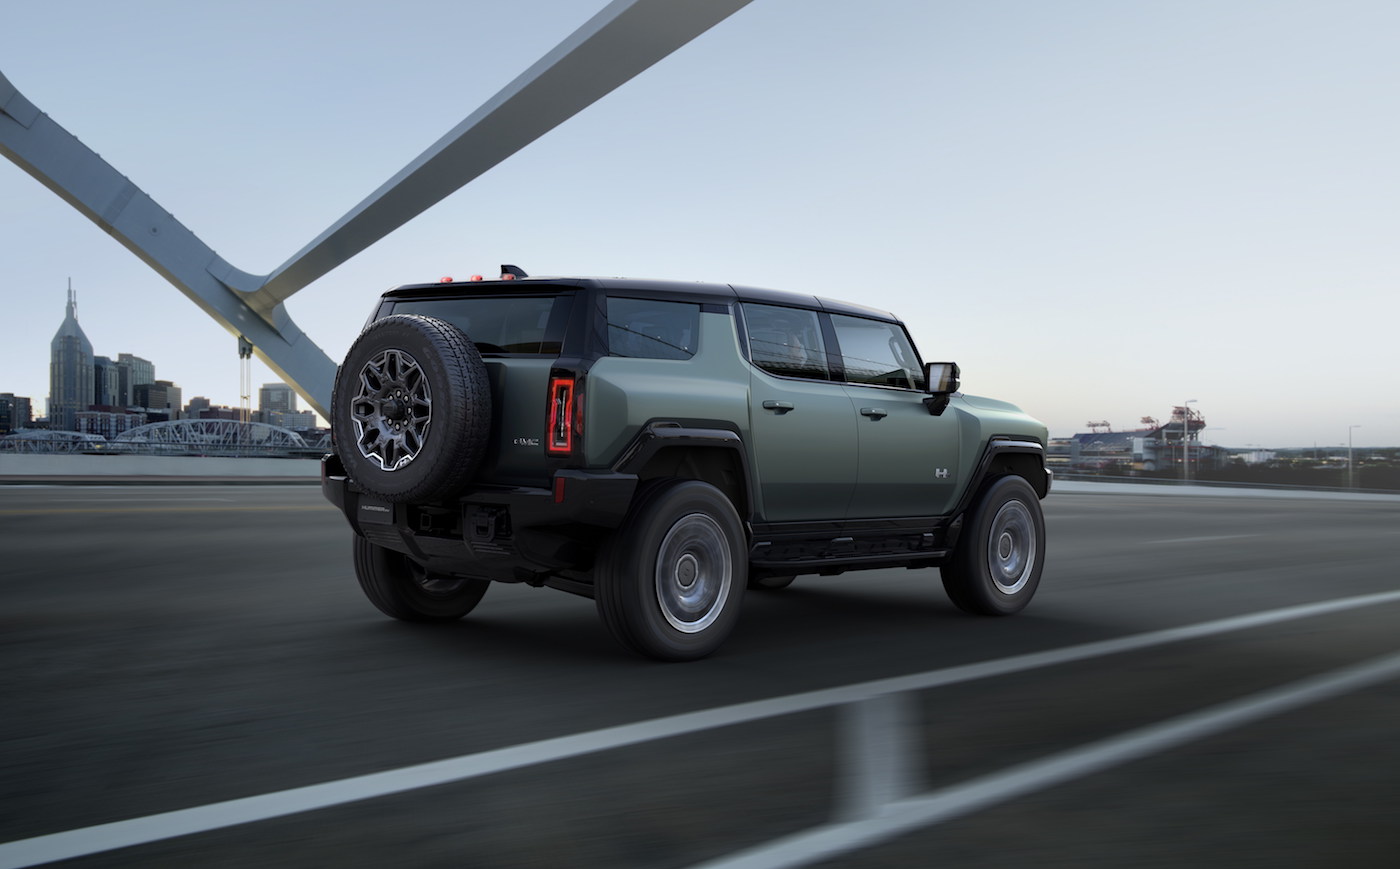 The GMC HUMMER EV SUV completes the HUMMER EV family and features a 126